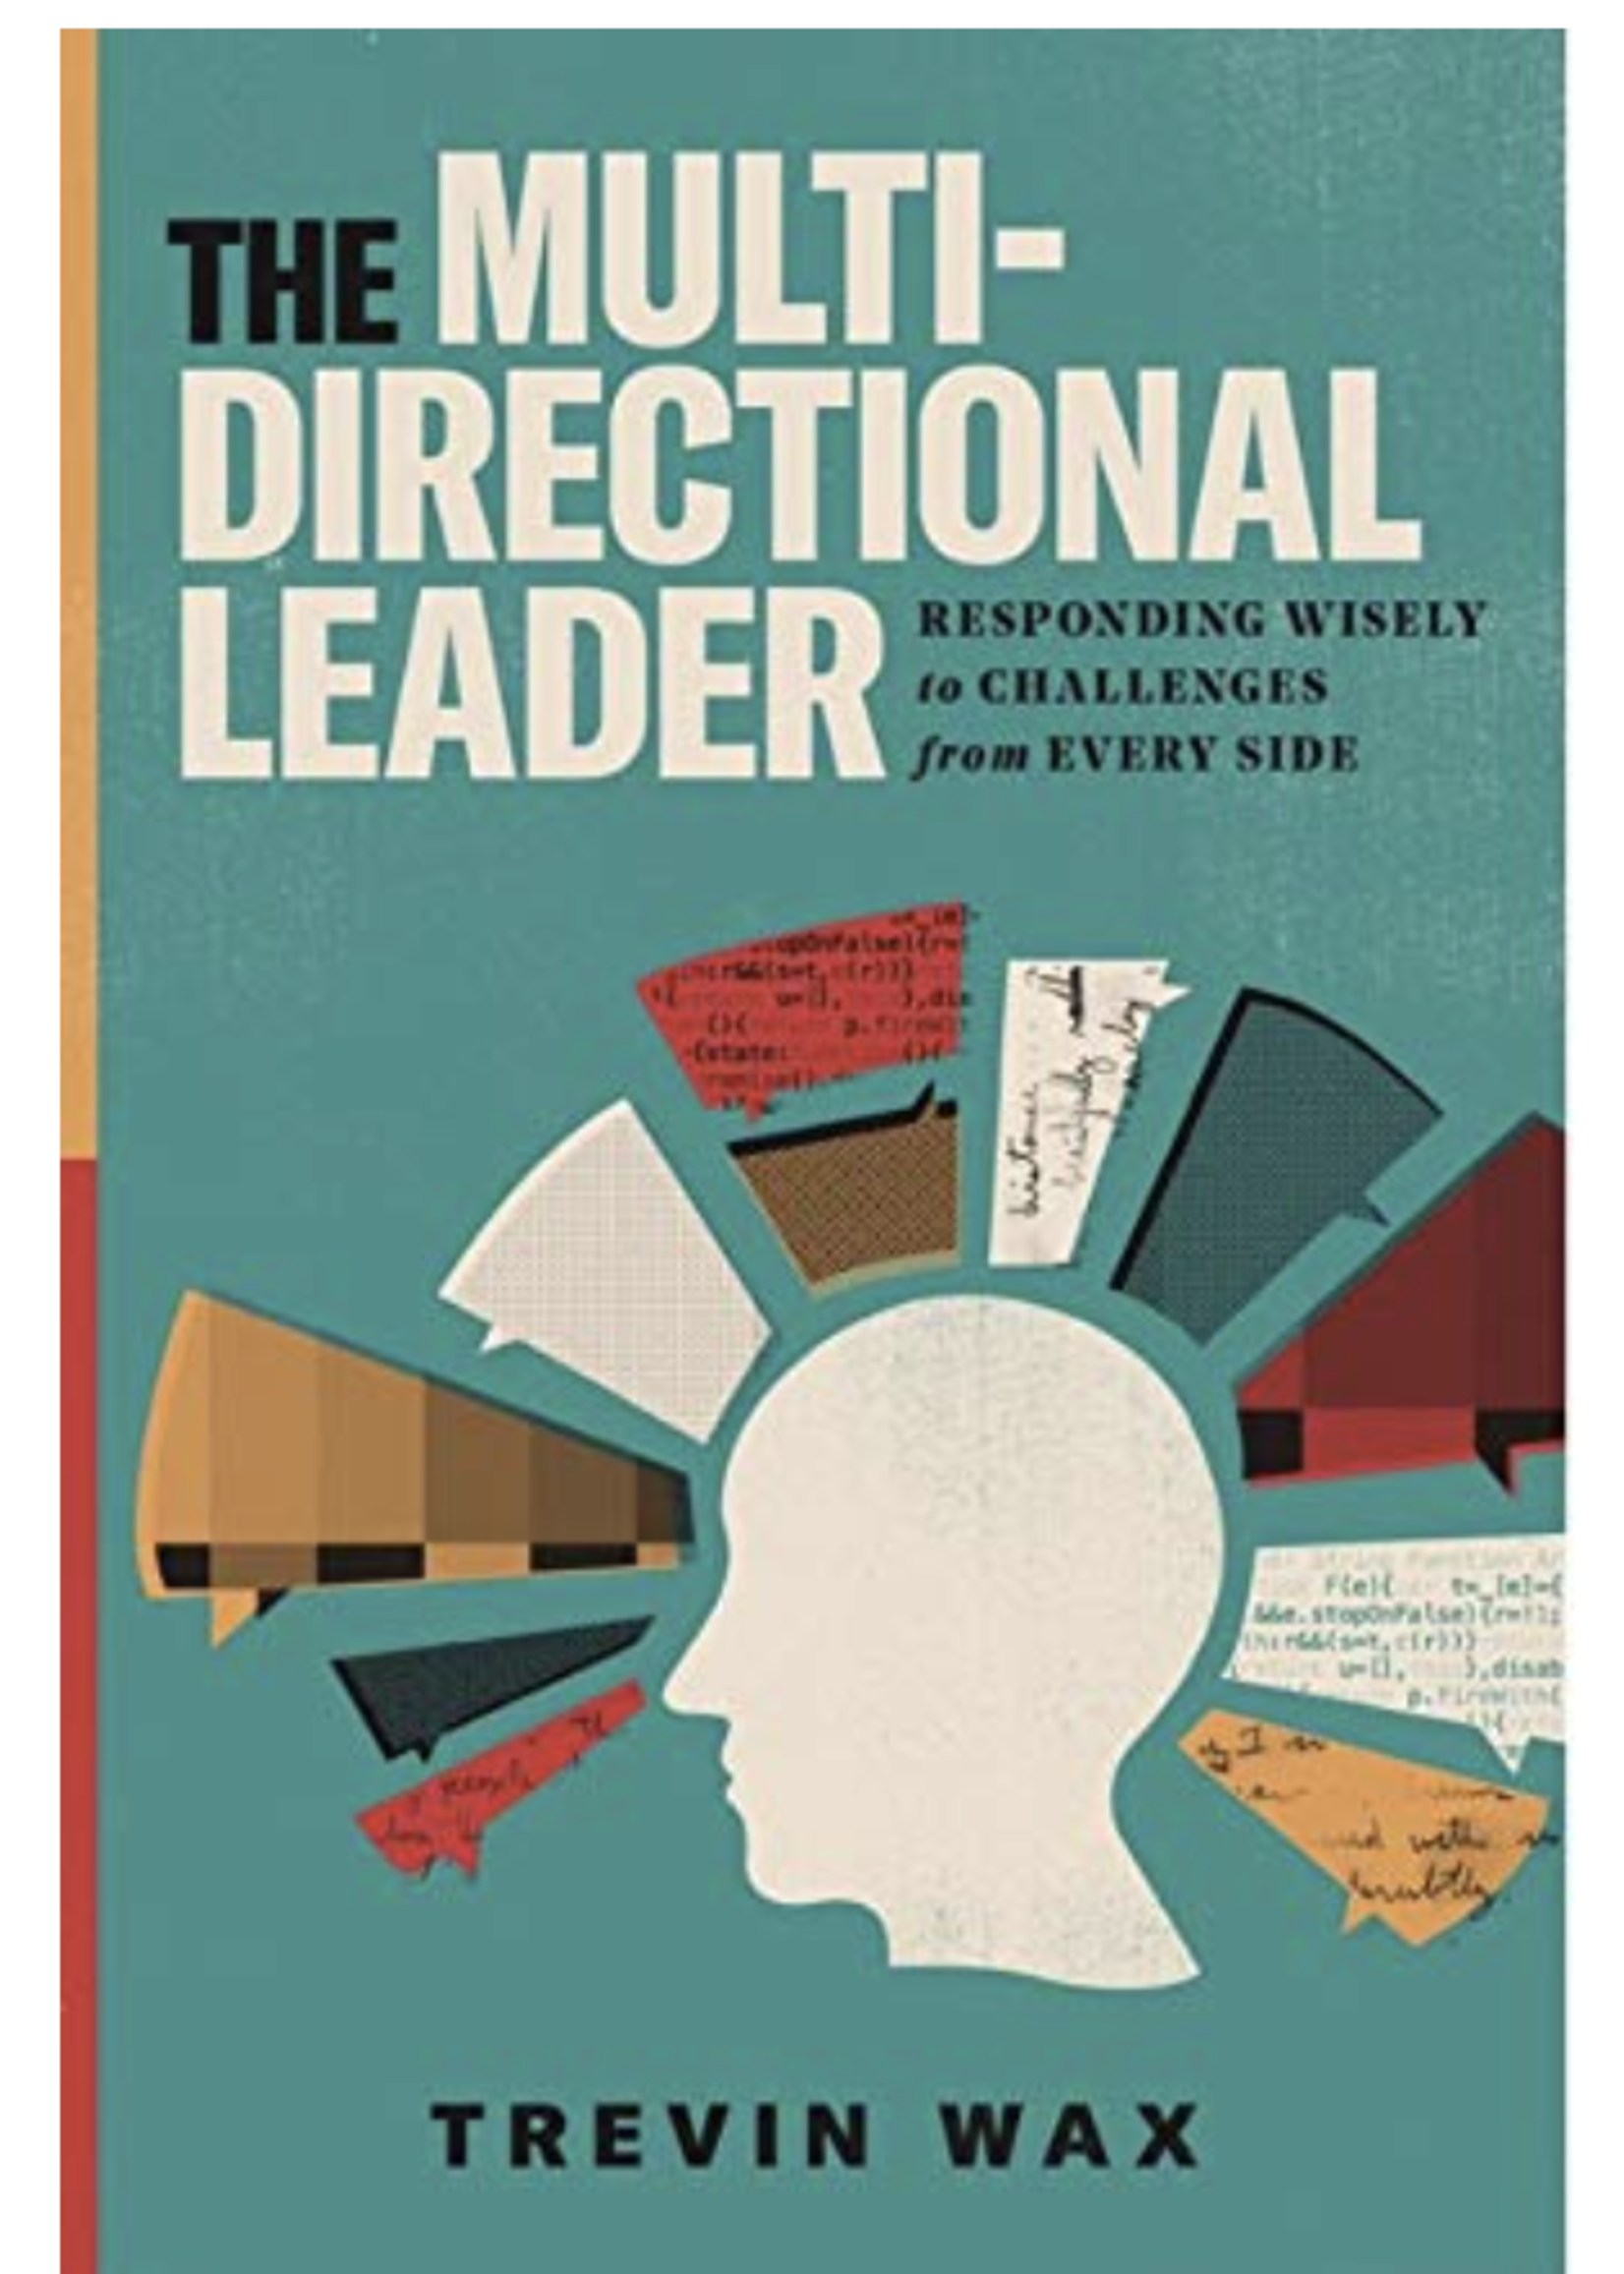 The Multi-Directional Leader [Trevin Wax]